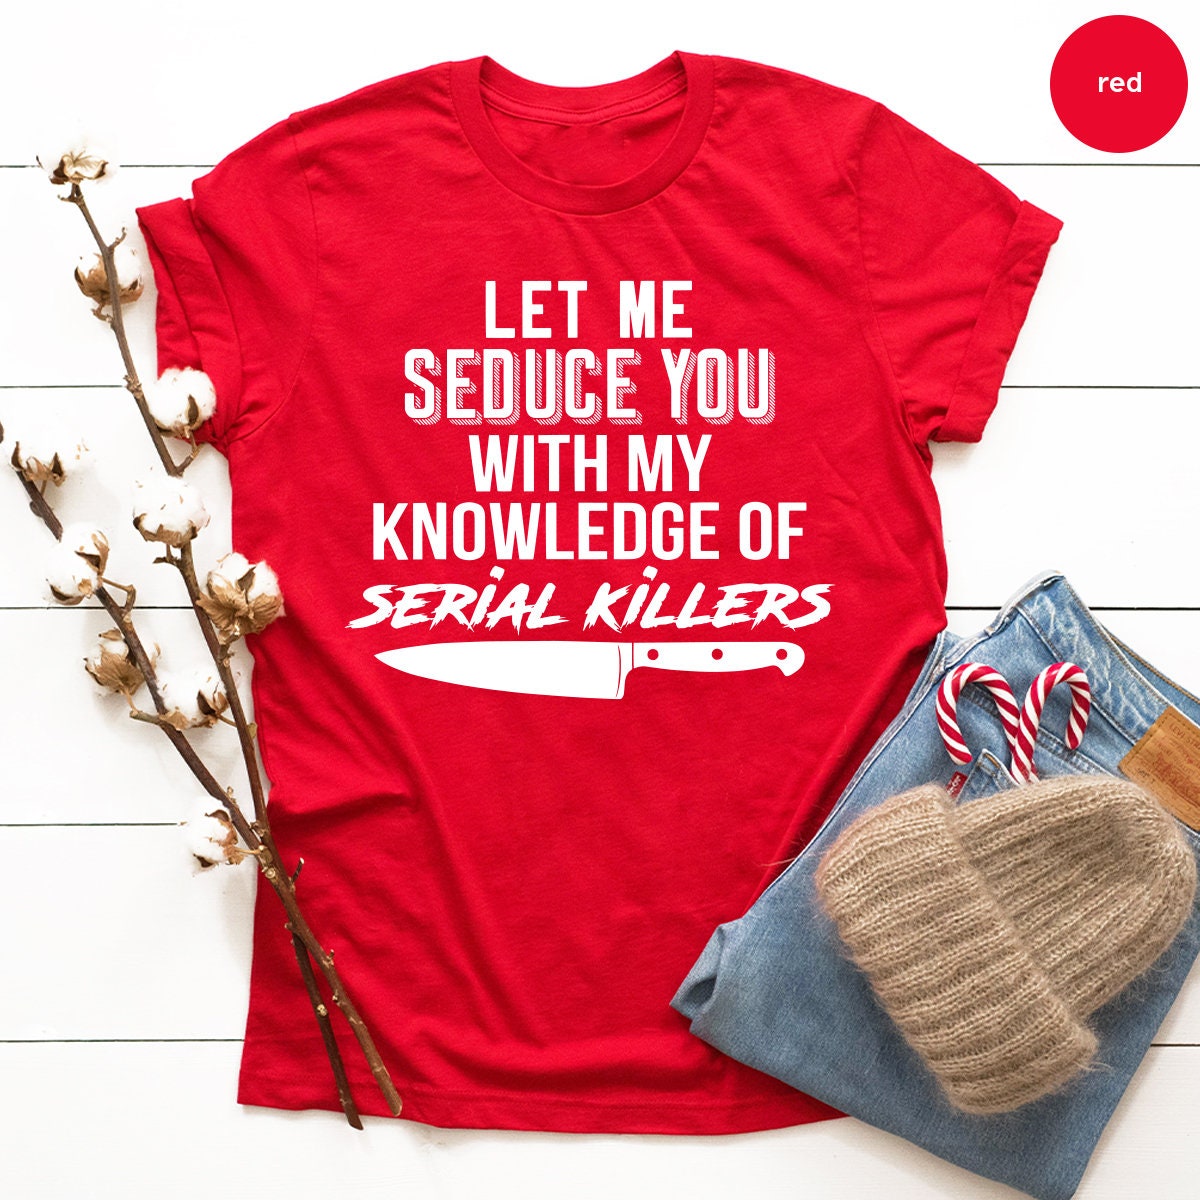 Serial Killer Shirt, Murder T Shirt, Horror TShirt, Crime Lover Gift, Crime Shirts, Let Me Seduce You With my Knowledge Of Serial Killers - Fastdeliverytees.com